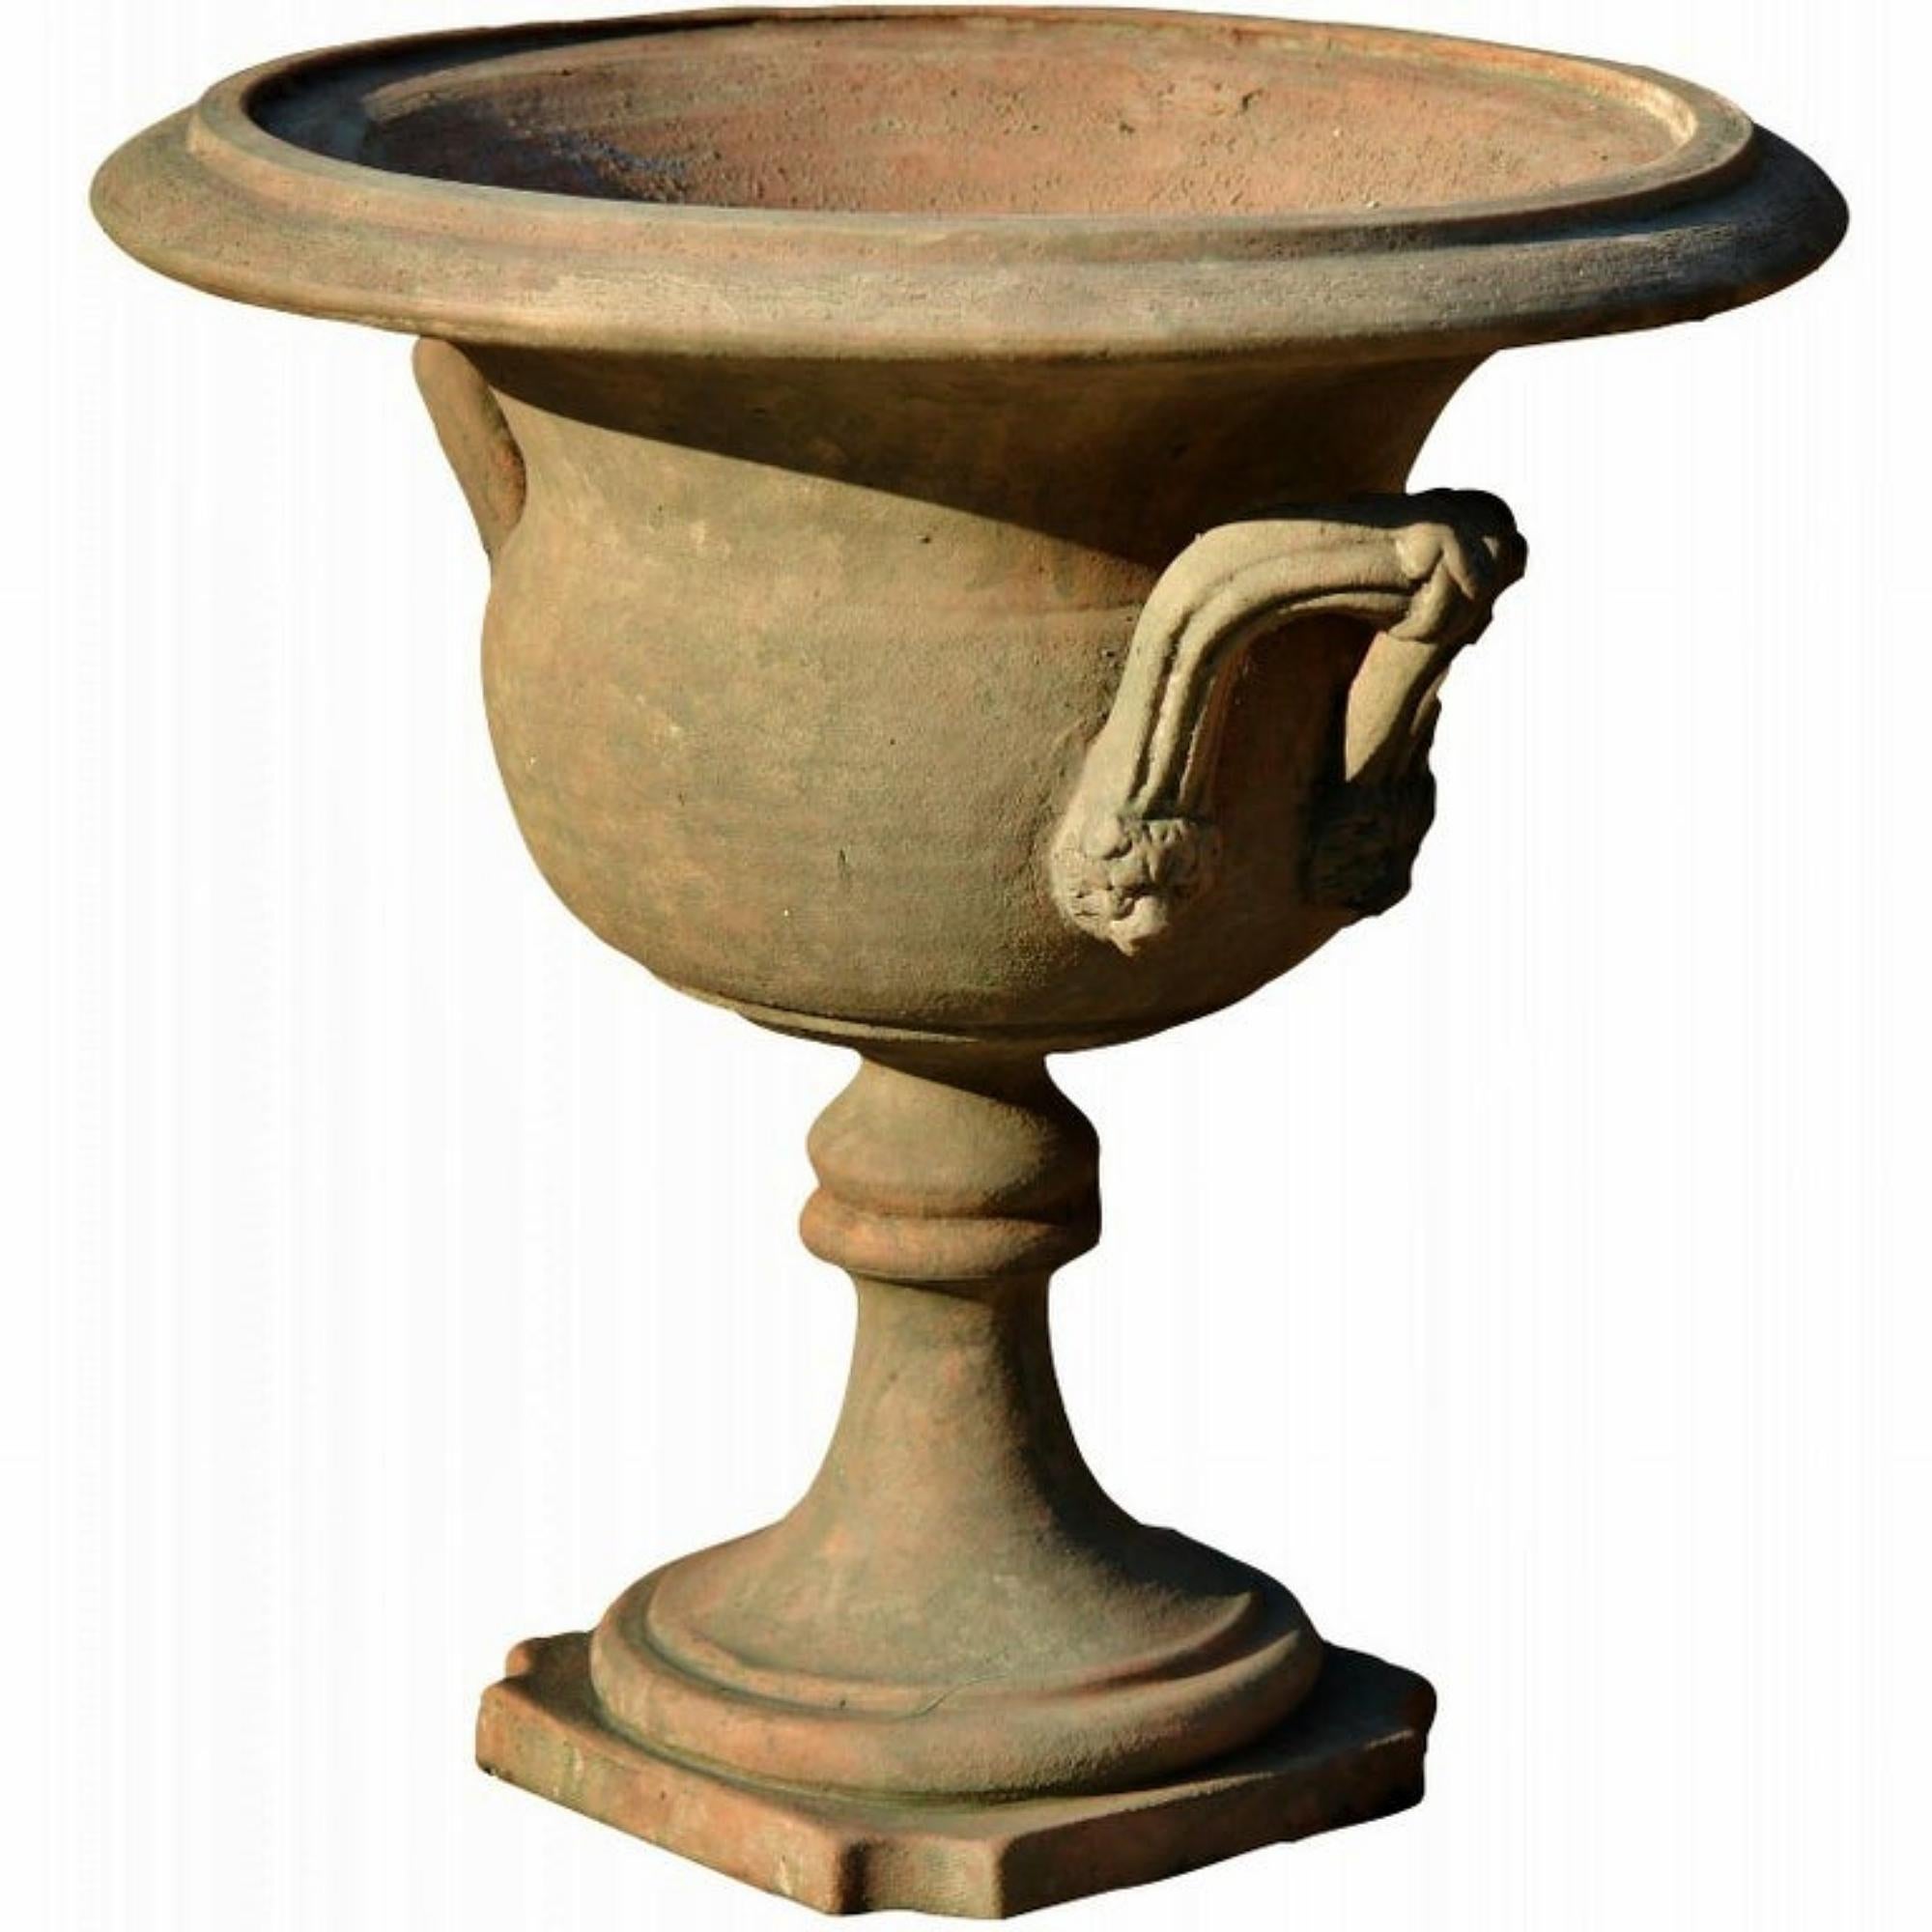 Italian Pair of Ornamental Terracotta Goblet with Loop Handles, Early 20th Century For Sale